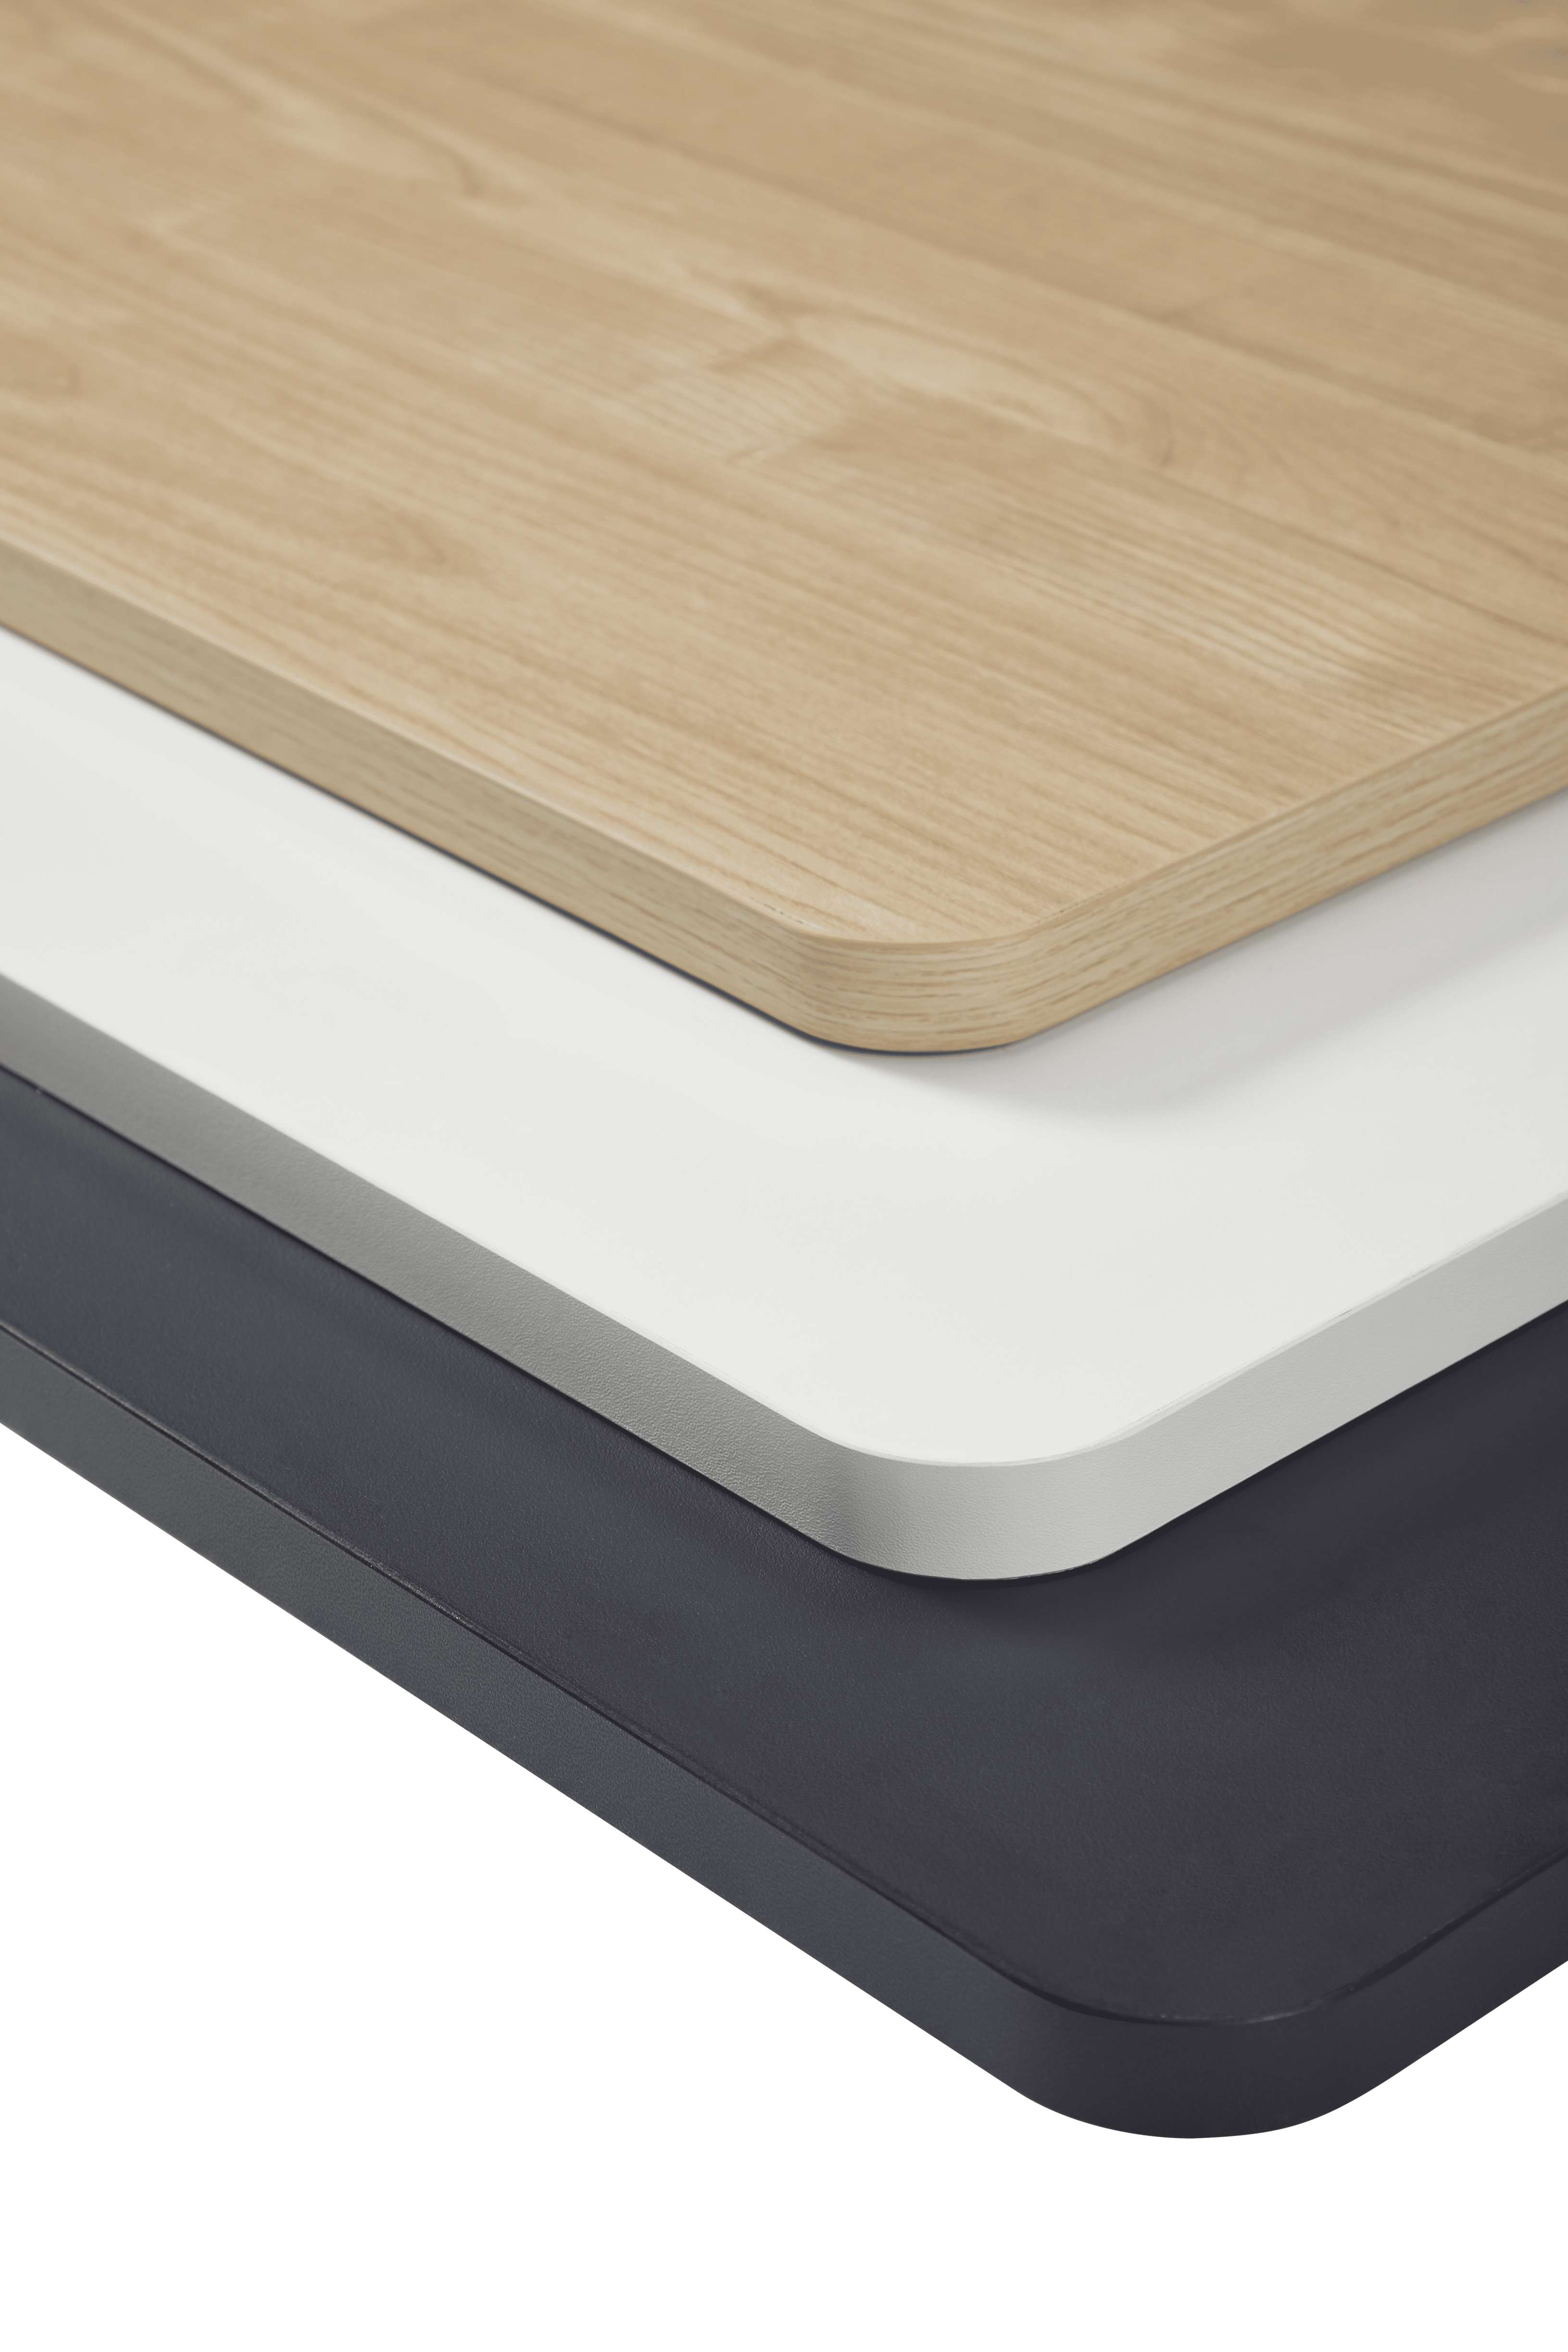 KOWO sit stand desk uses quality non-spliced single whole piece tabletop